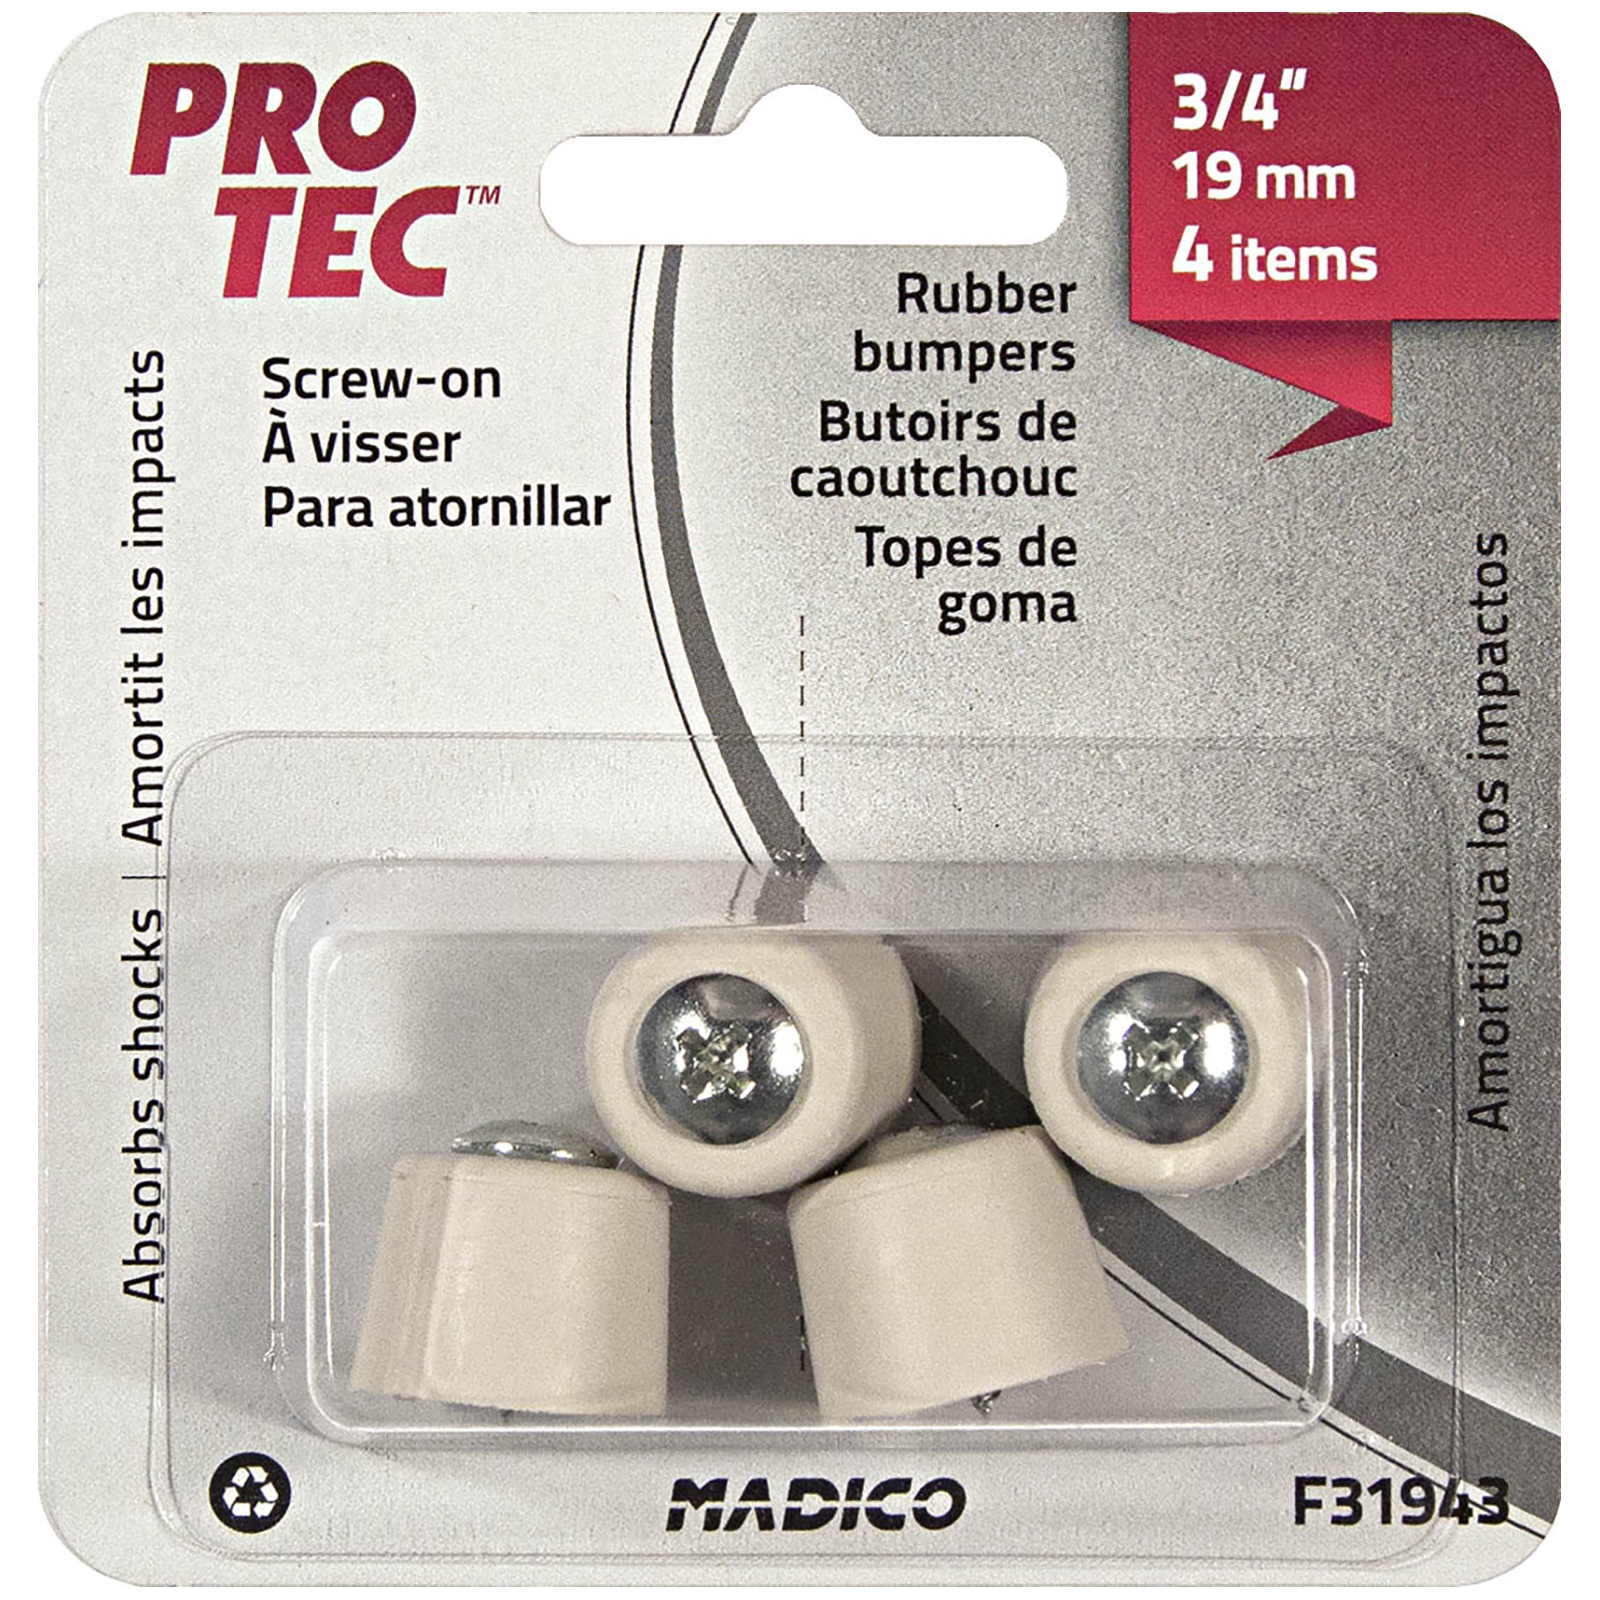 Madico 22mm Rubber White Bumper Round Protec Floor Protection - 4 Pack